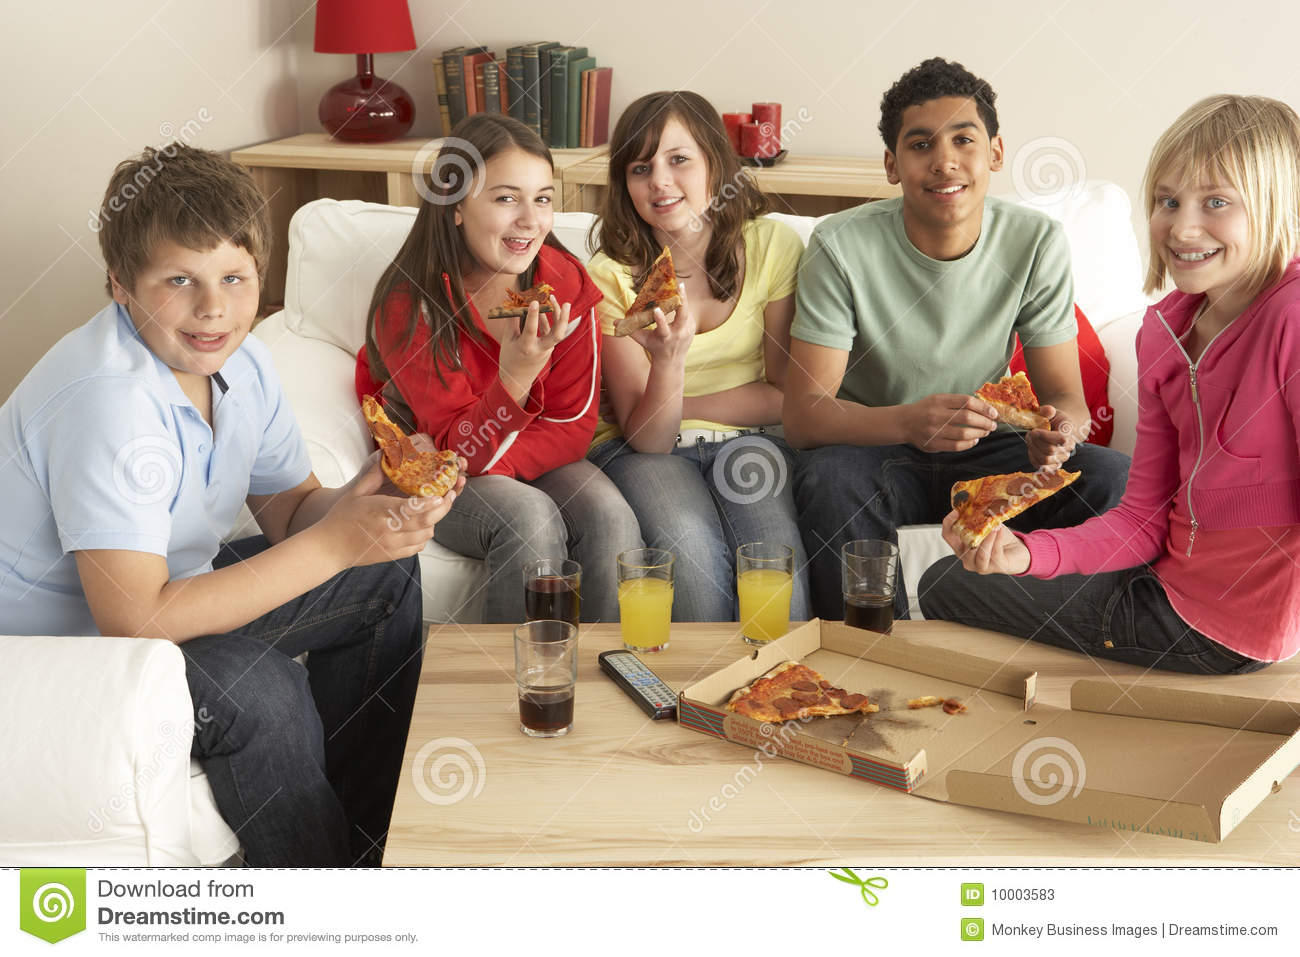 Group Of Children Eating Pizza At Home Stock Photos   Image  10003583